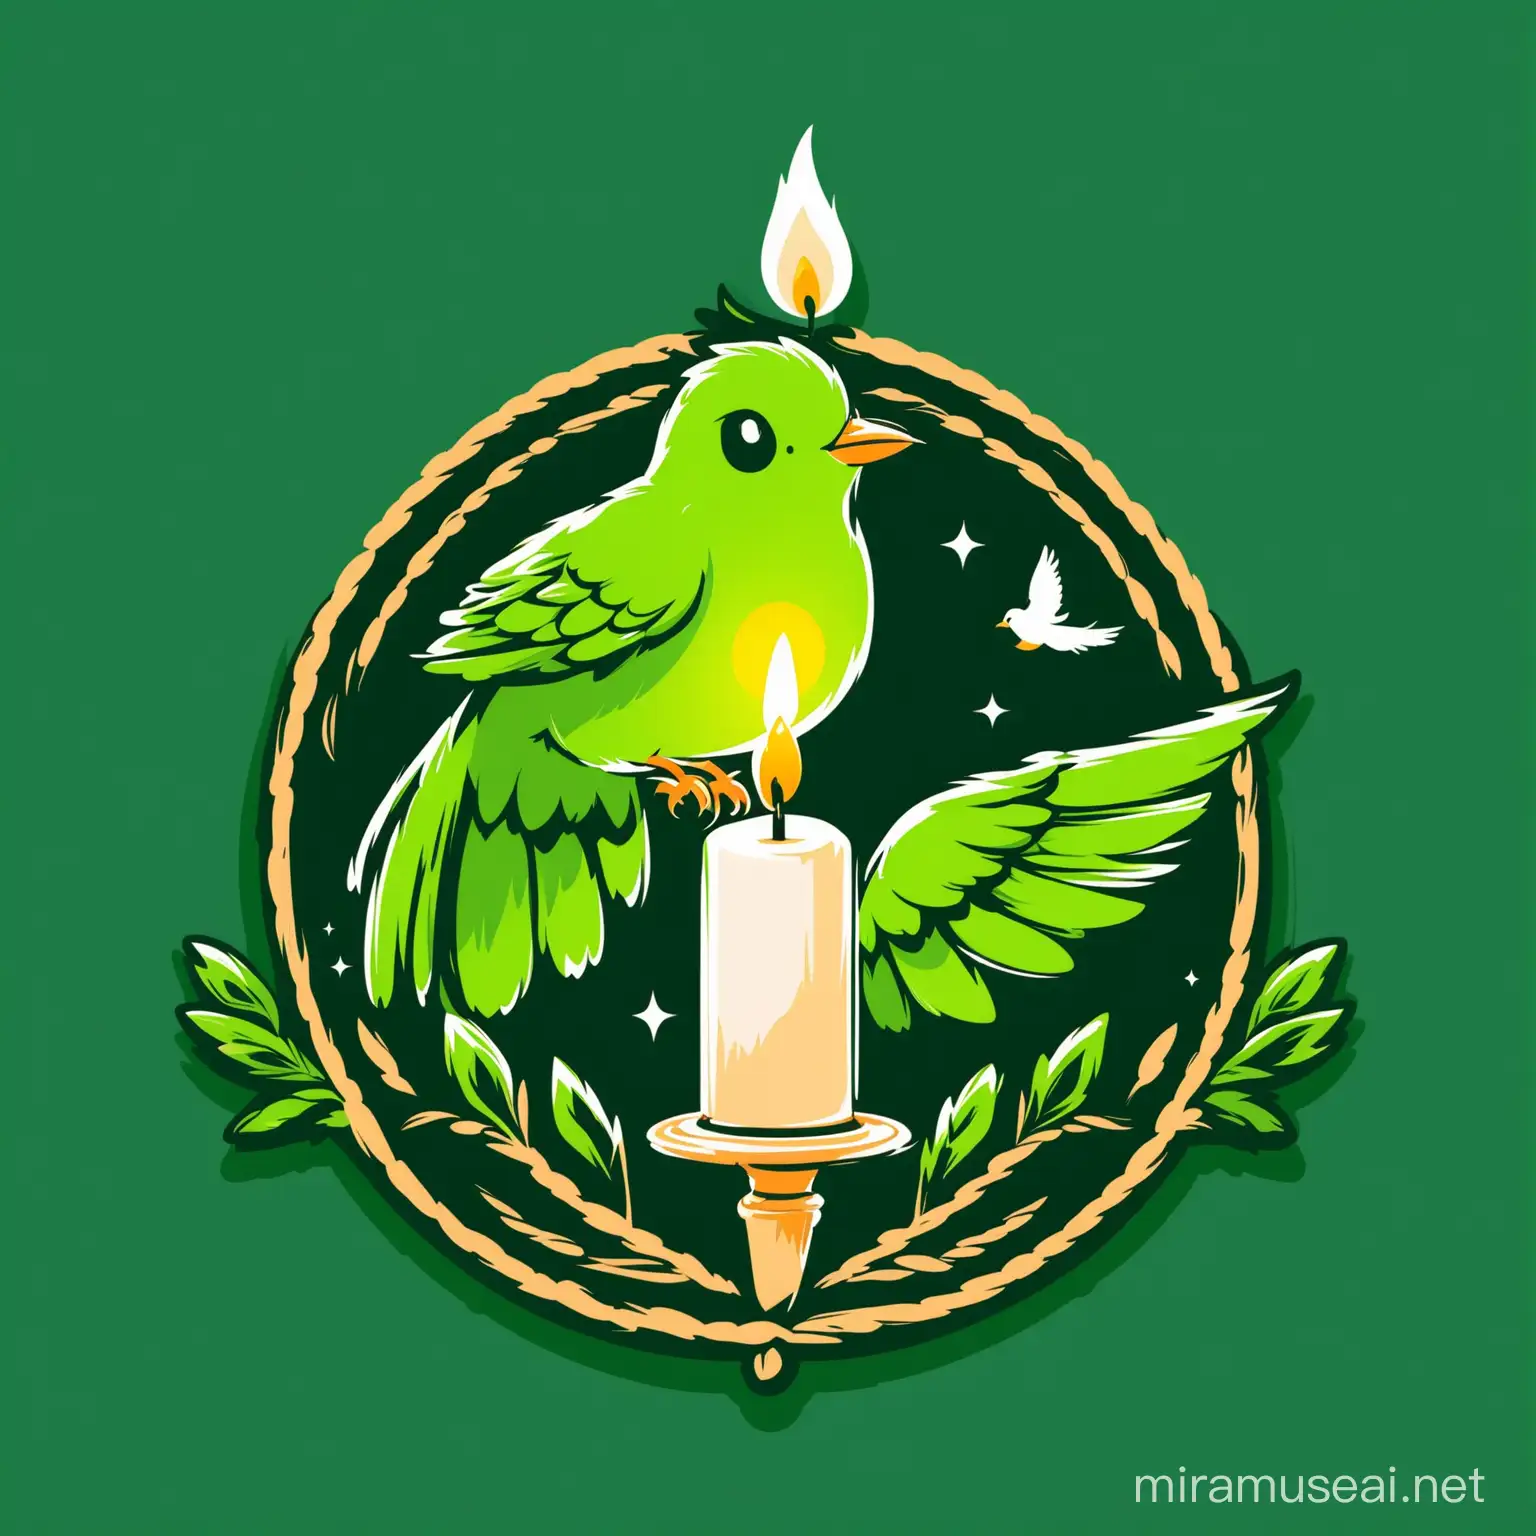 logo
green bird and candle
